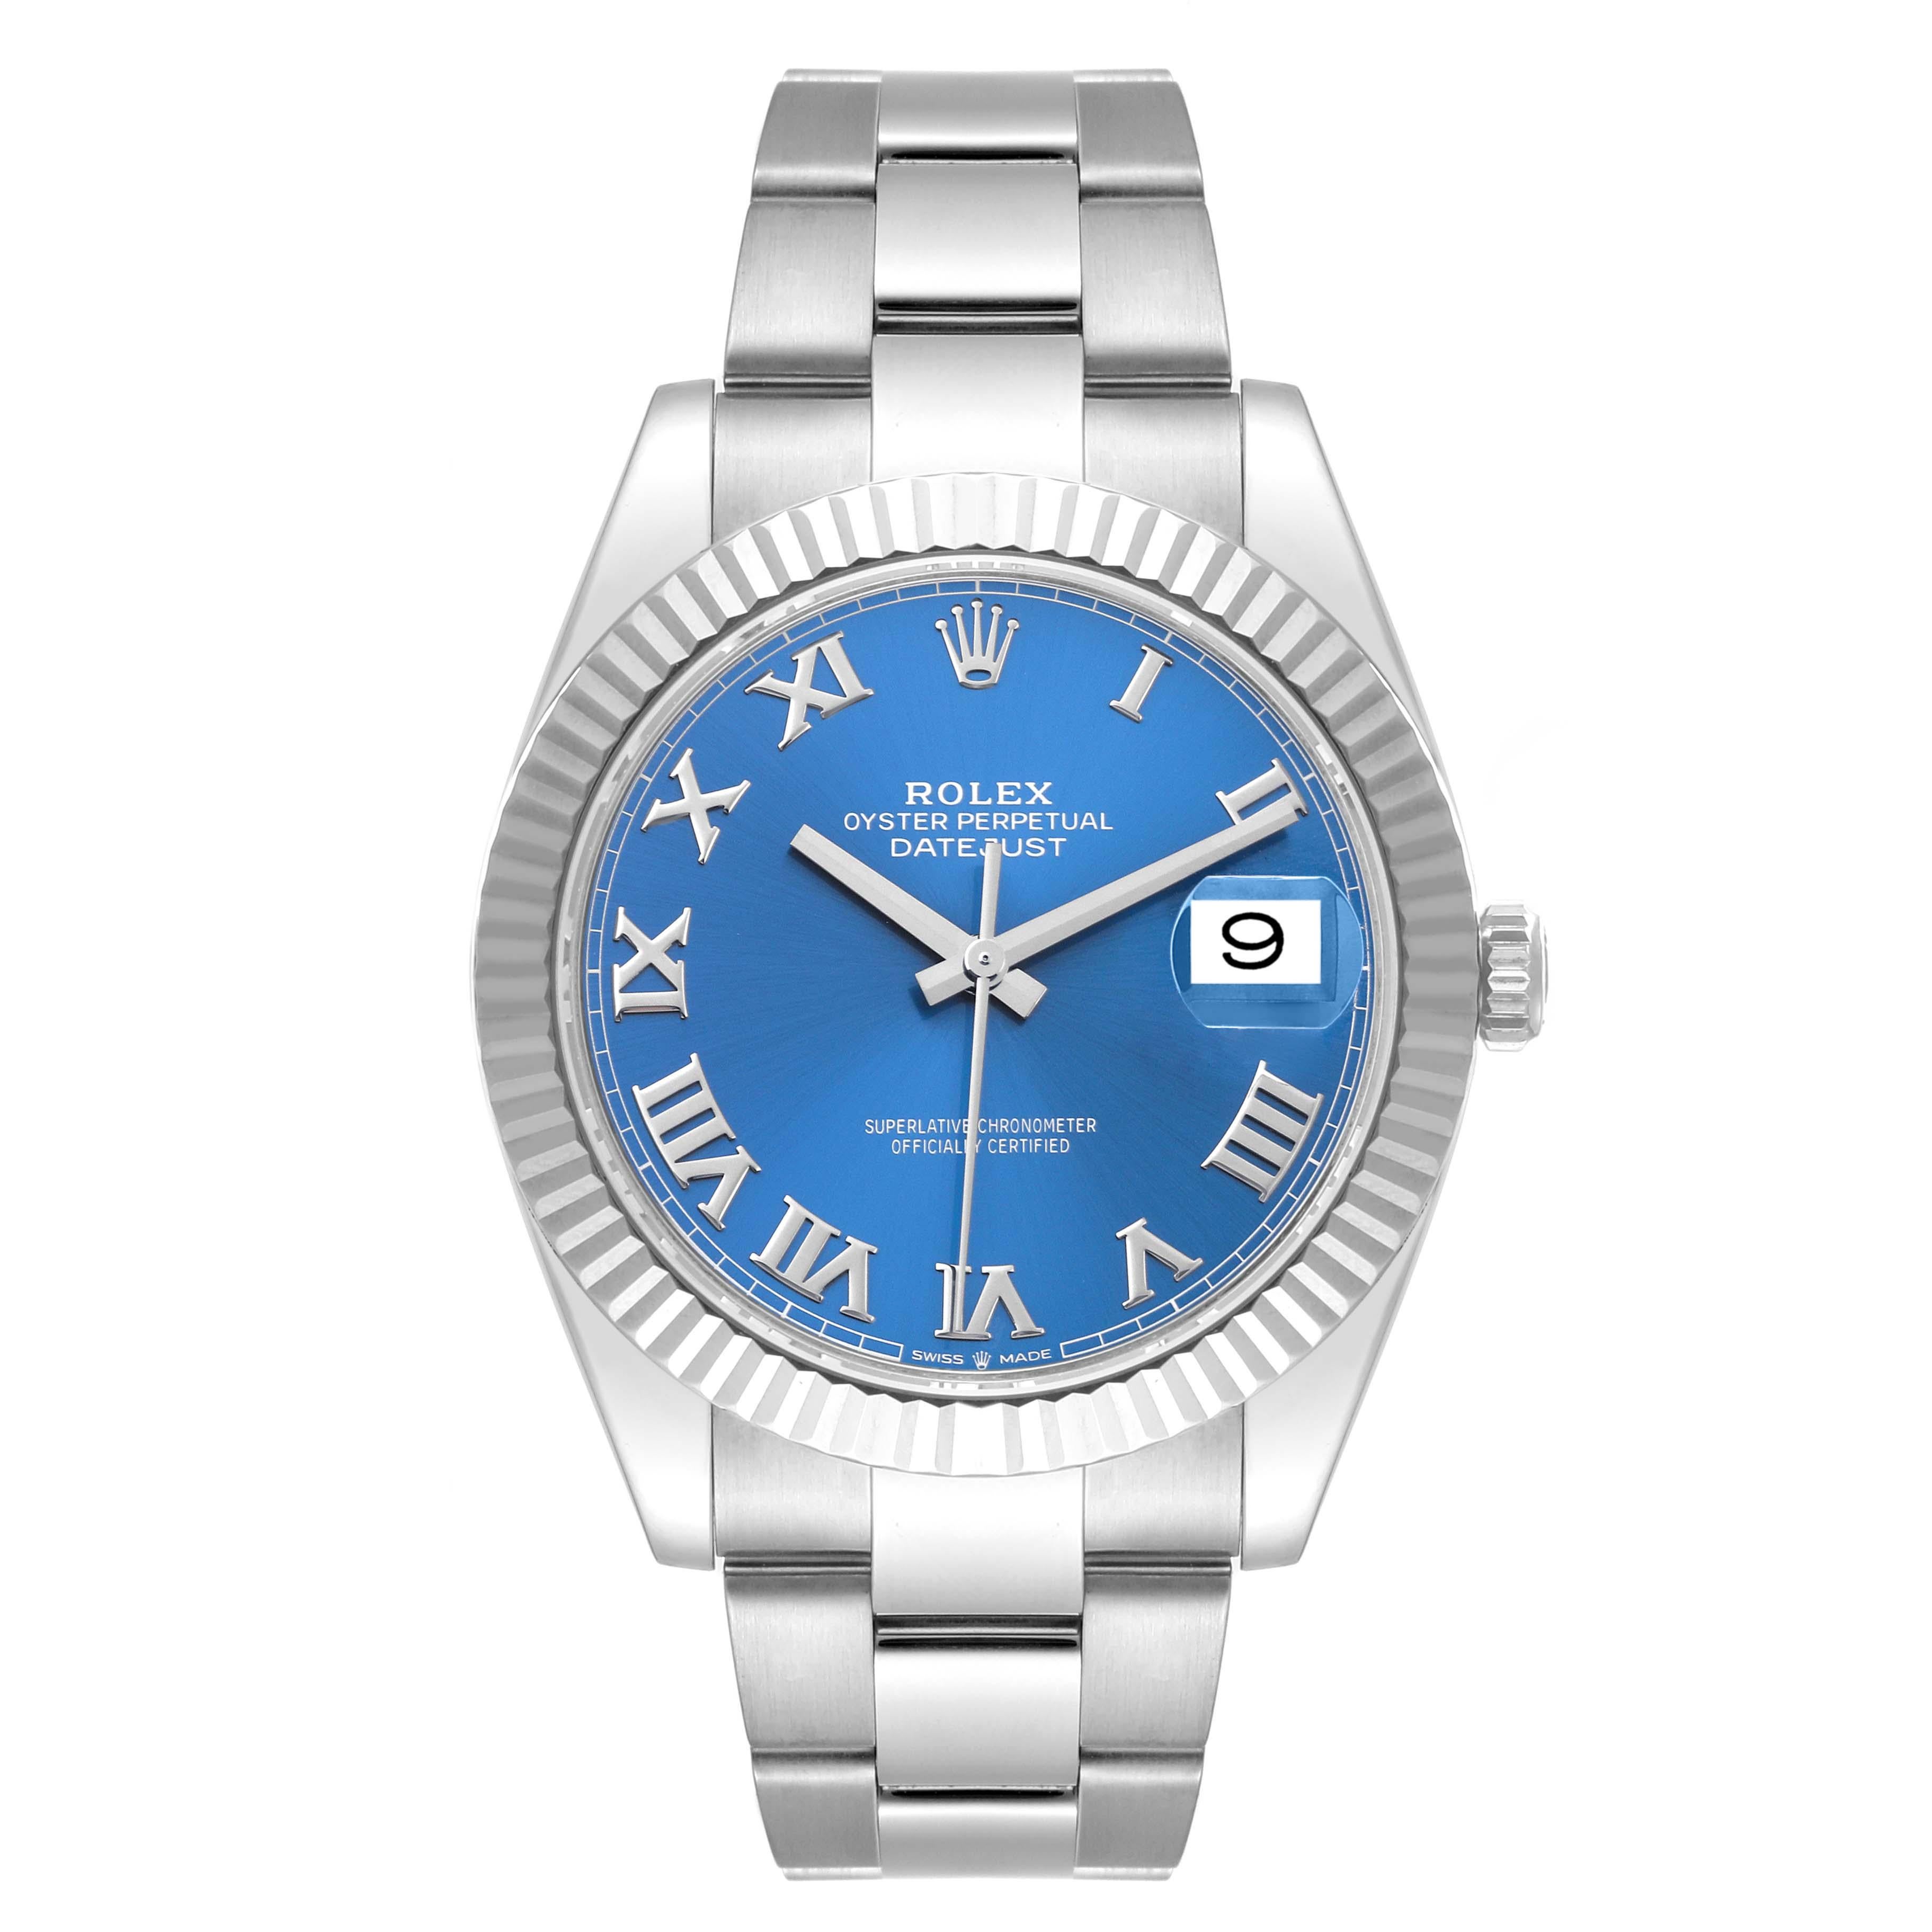 Men's Rolex Datejust 41 Steel White Gold Blue Dial Mens Watch 126334 Box Card For Sale